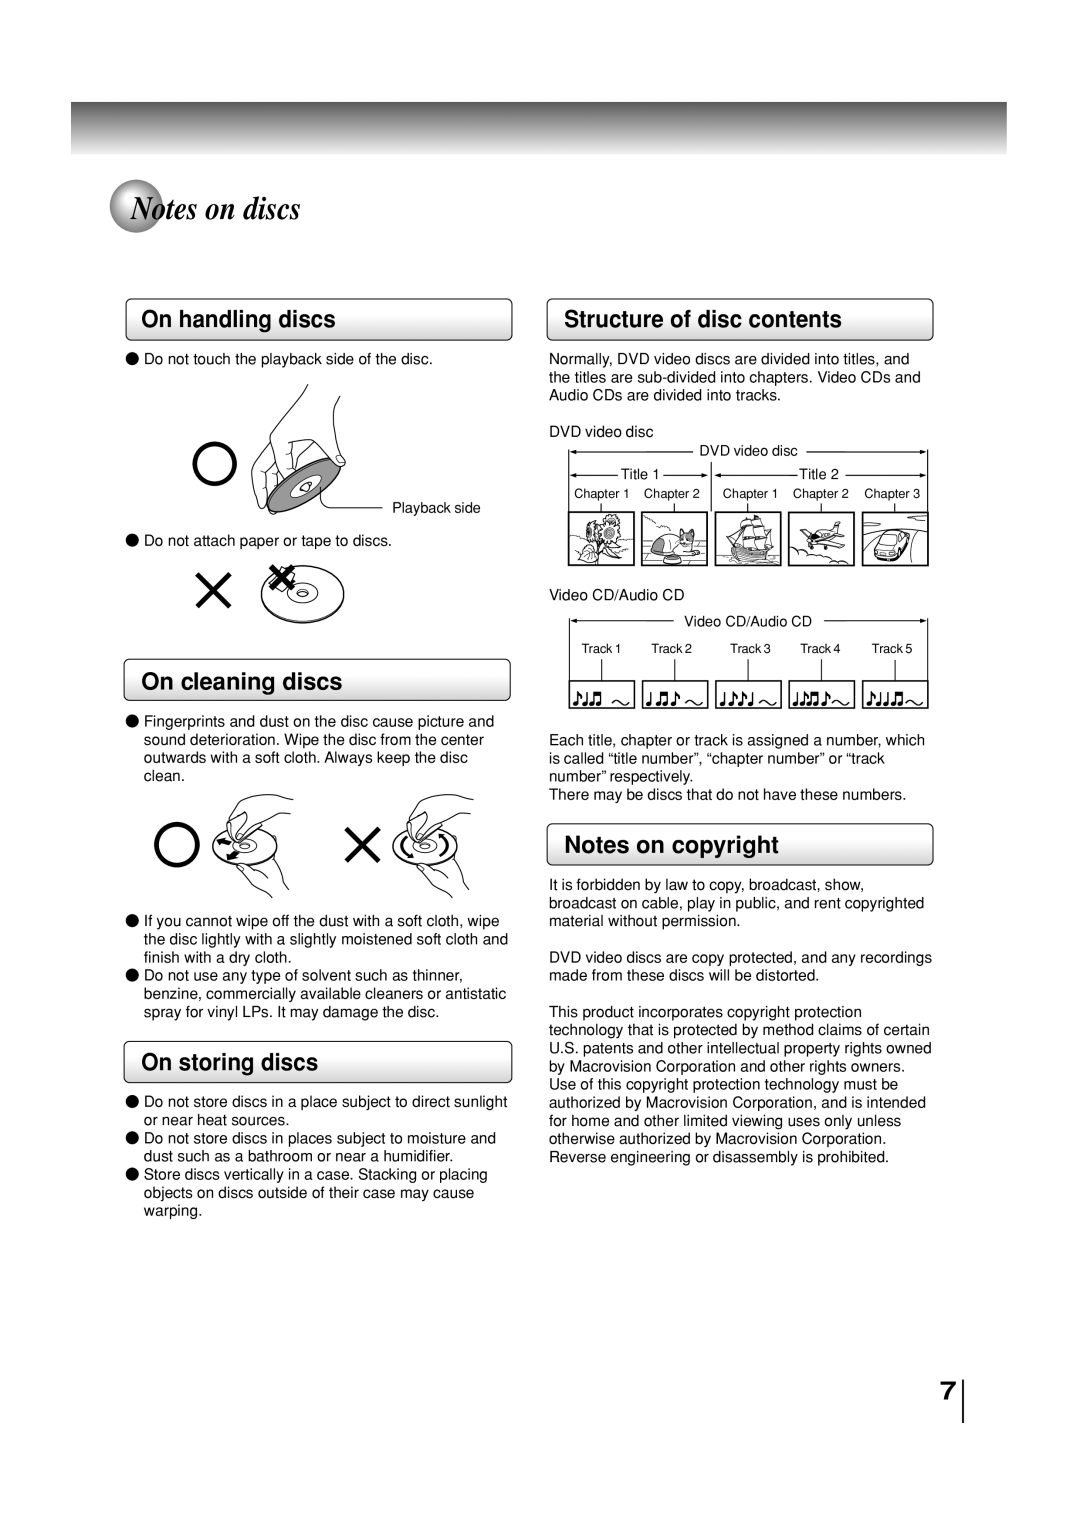 Toshiba SD-3860SC manual Notes on discs, On handling discs, On cleaning discs, On storing discs, Structure of disc contents 